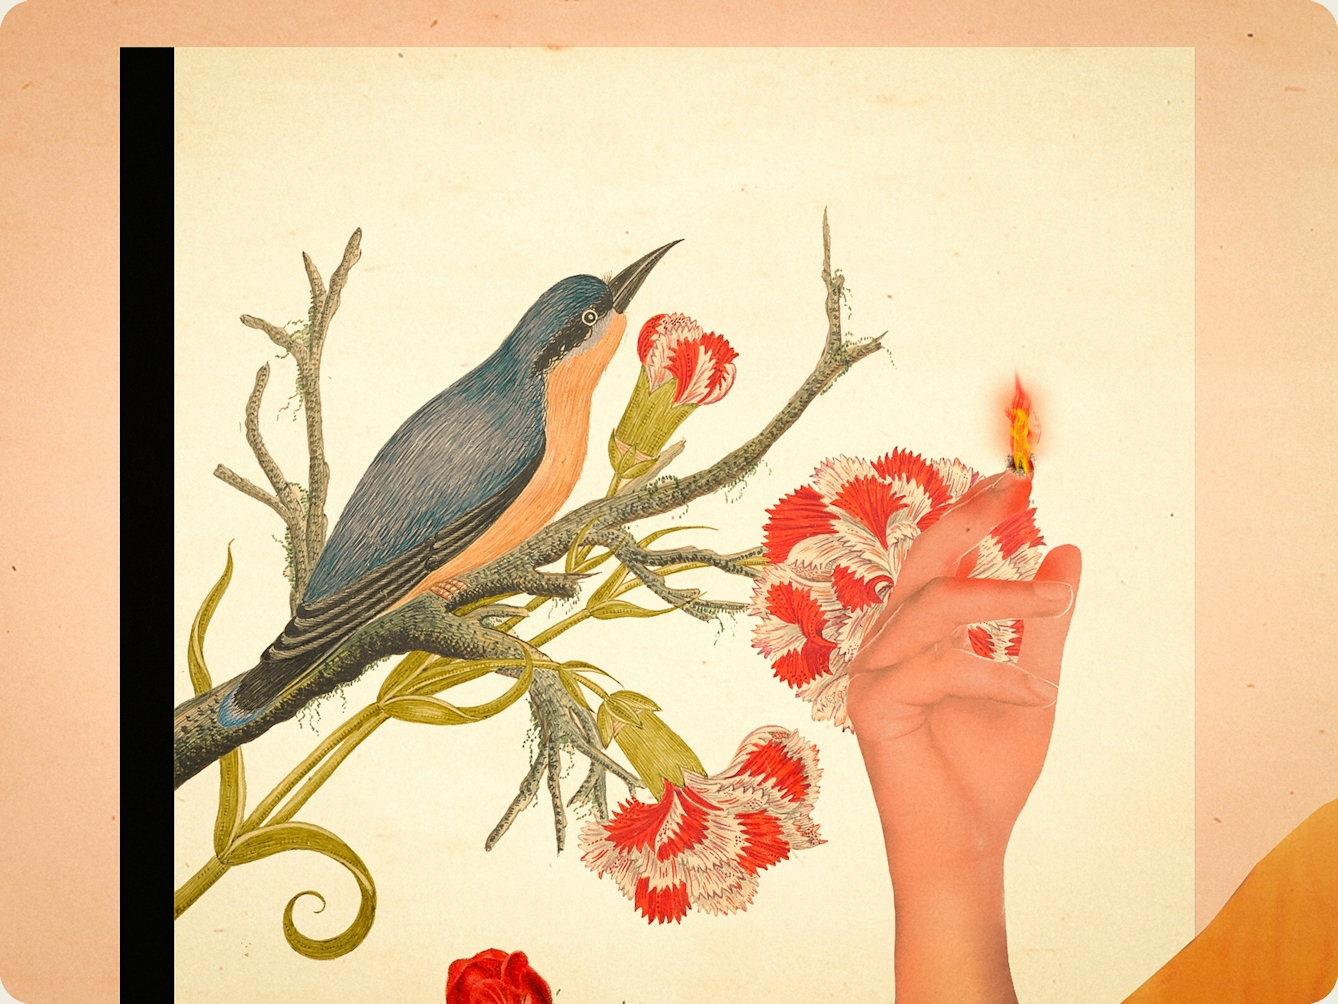 Detail from a larger mixed media digital artwork combining found imagery from vintage magazines and books with painted and textured elements. The overall hues are oranges, yellows and reds. At the centre of the artwork is a recessed window frame. Through the window a drawing of a kingfisher can be seen, perching on a branch next to a green stem from which red and white flowers are blooming. Appearing into the image from the right is the raised right hand of a woman and  a flame is appearing from her index fingertip.